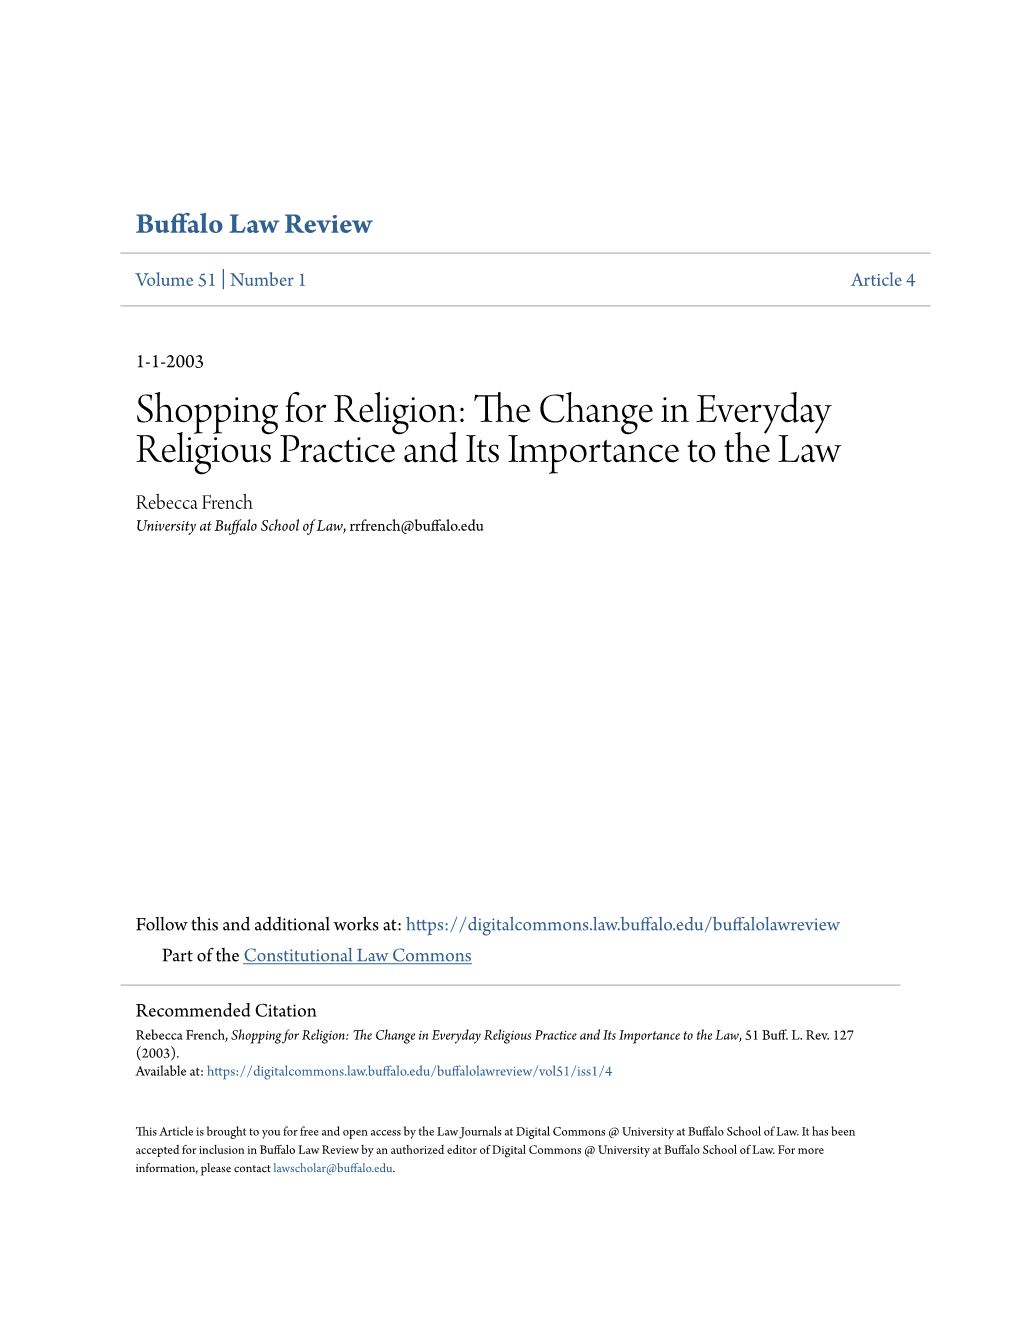 Shopping for Religion: the Change in Everyday Religious Practice and Its Importance to the Law, 51 Buff